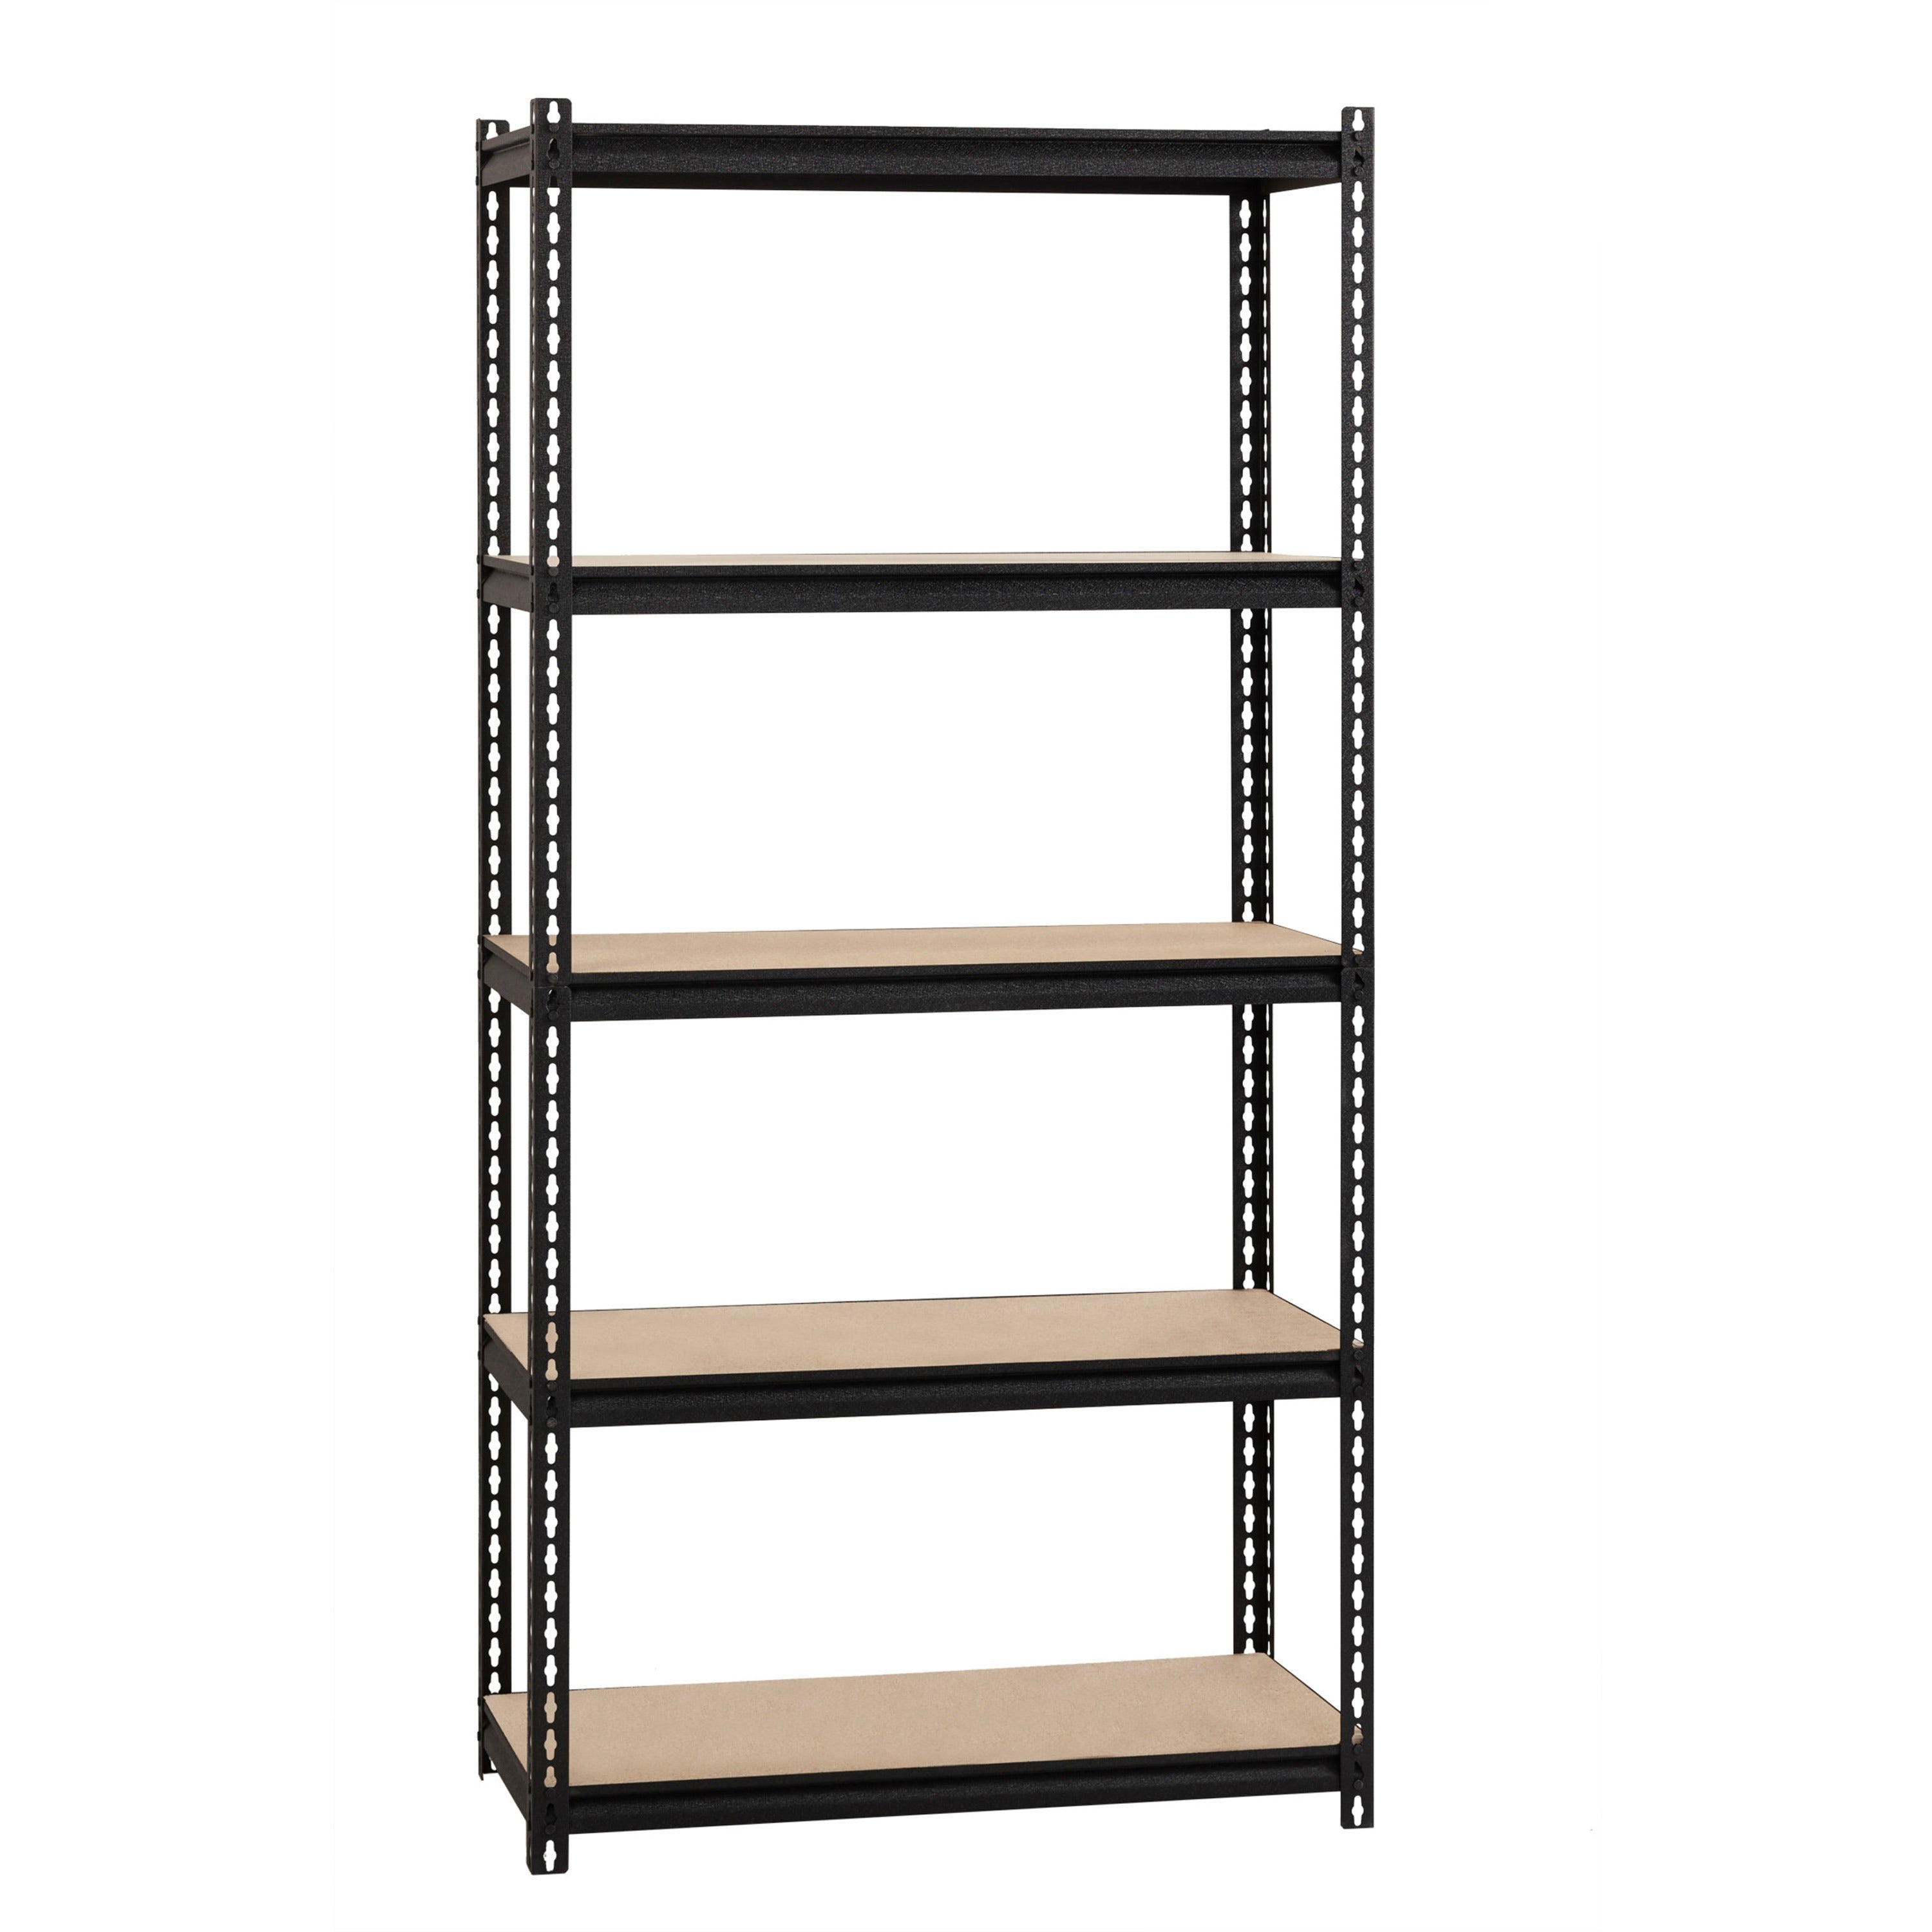 lorell-iron-horse-2300-lb-capacity-riveted-shelving-5-shelfves-72-height-x-36-width-x-18-depth-30%-recycled-black-steel-particleboard-1-each_llr59697 - 3